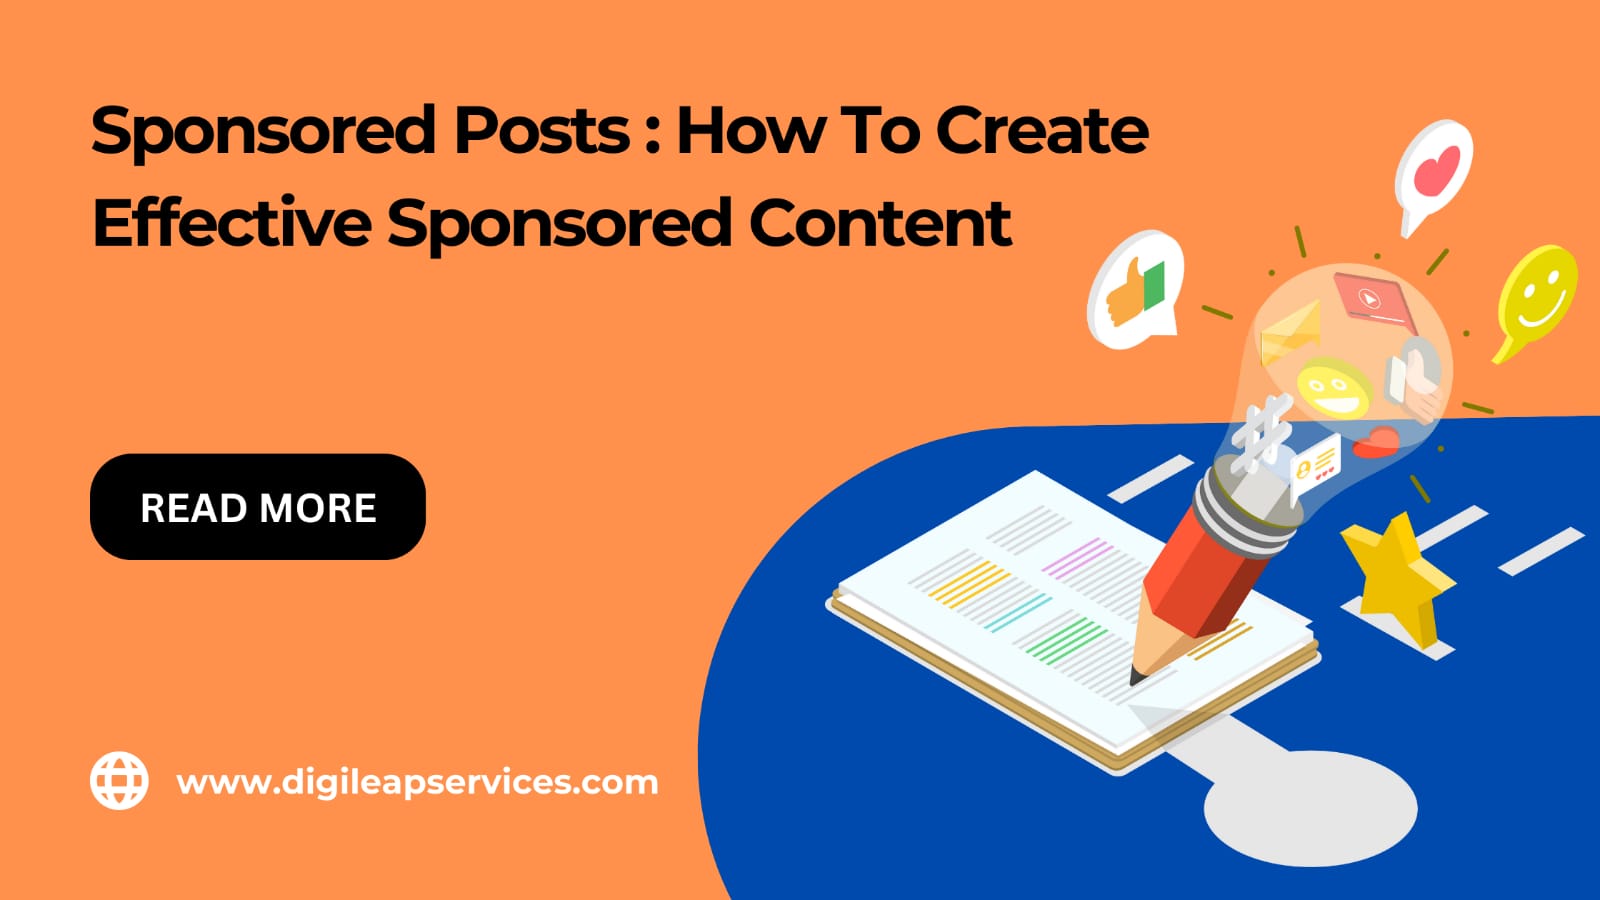 Sponsored posts: How to create effective sponsored content